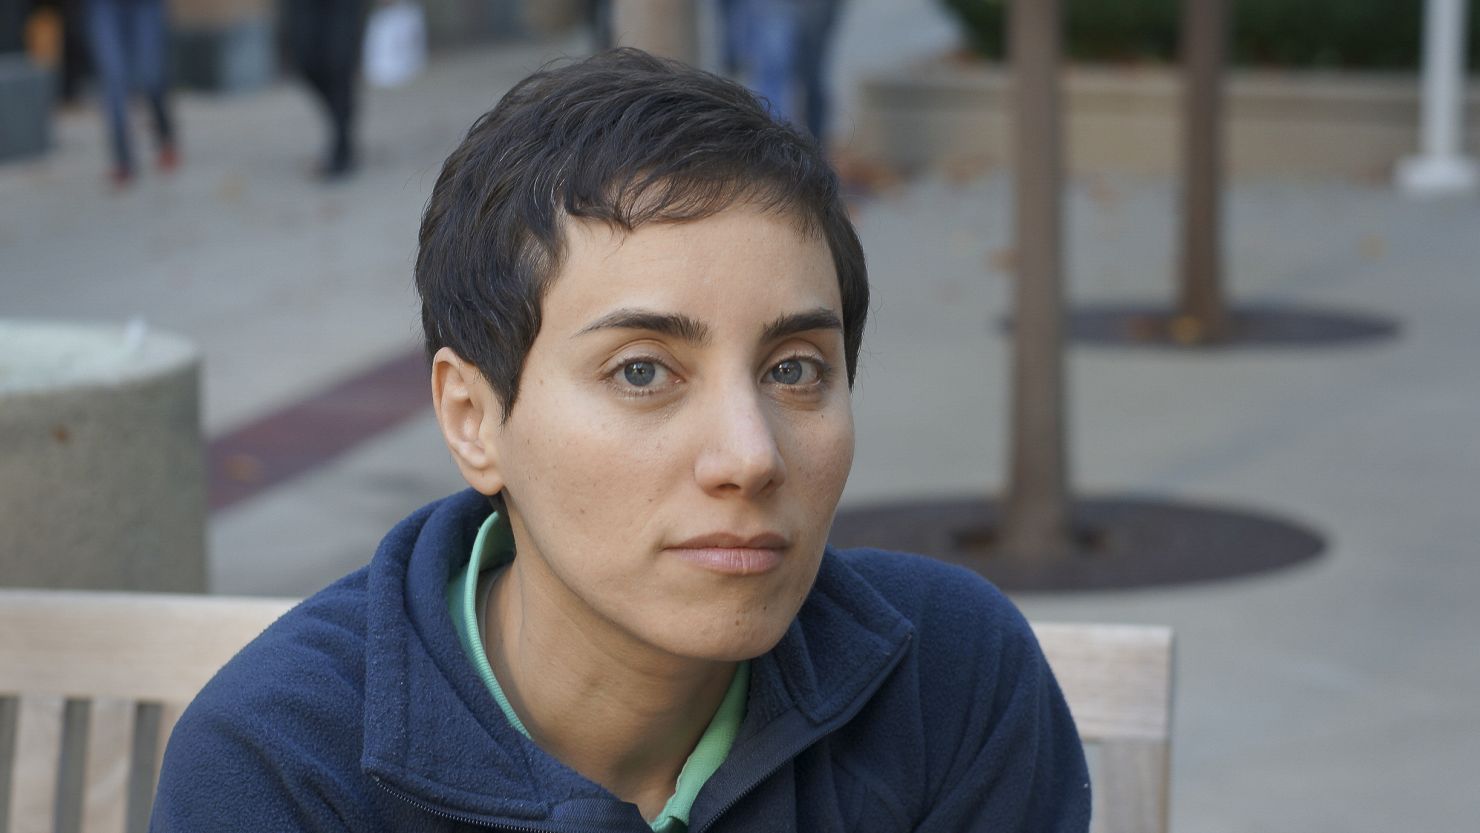 Maryam Mirzakhani is the first woman to win mathematics' highest honor, the Fields Medal.